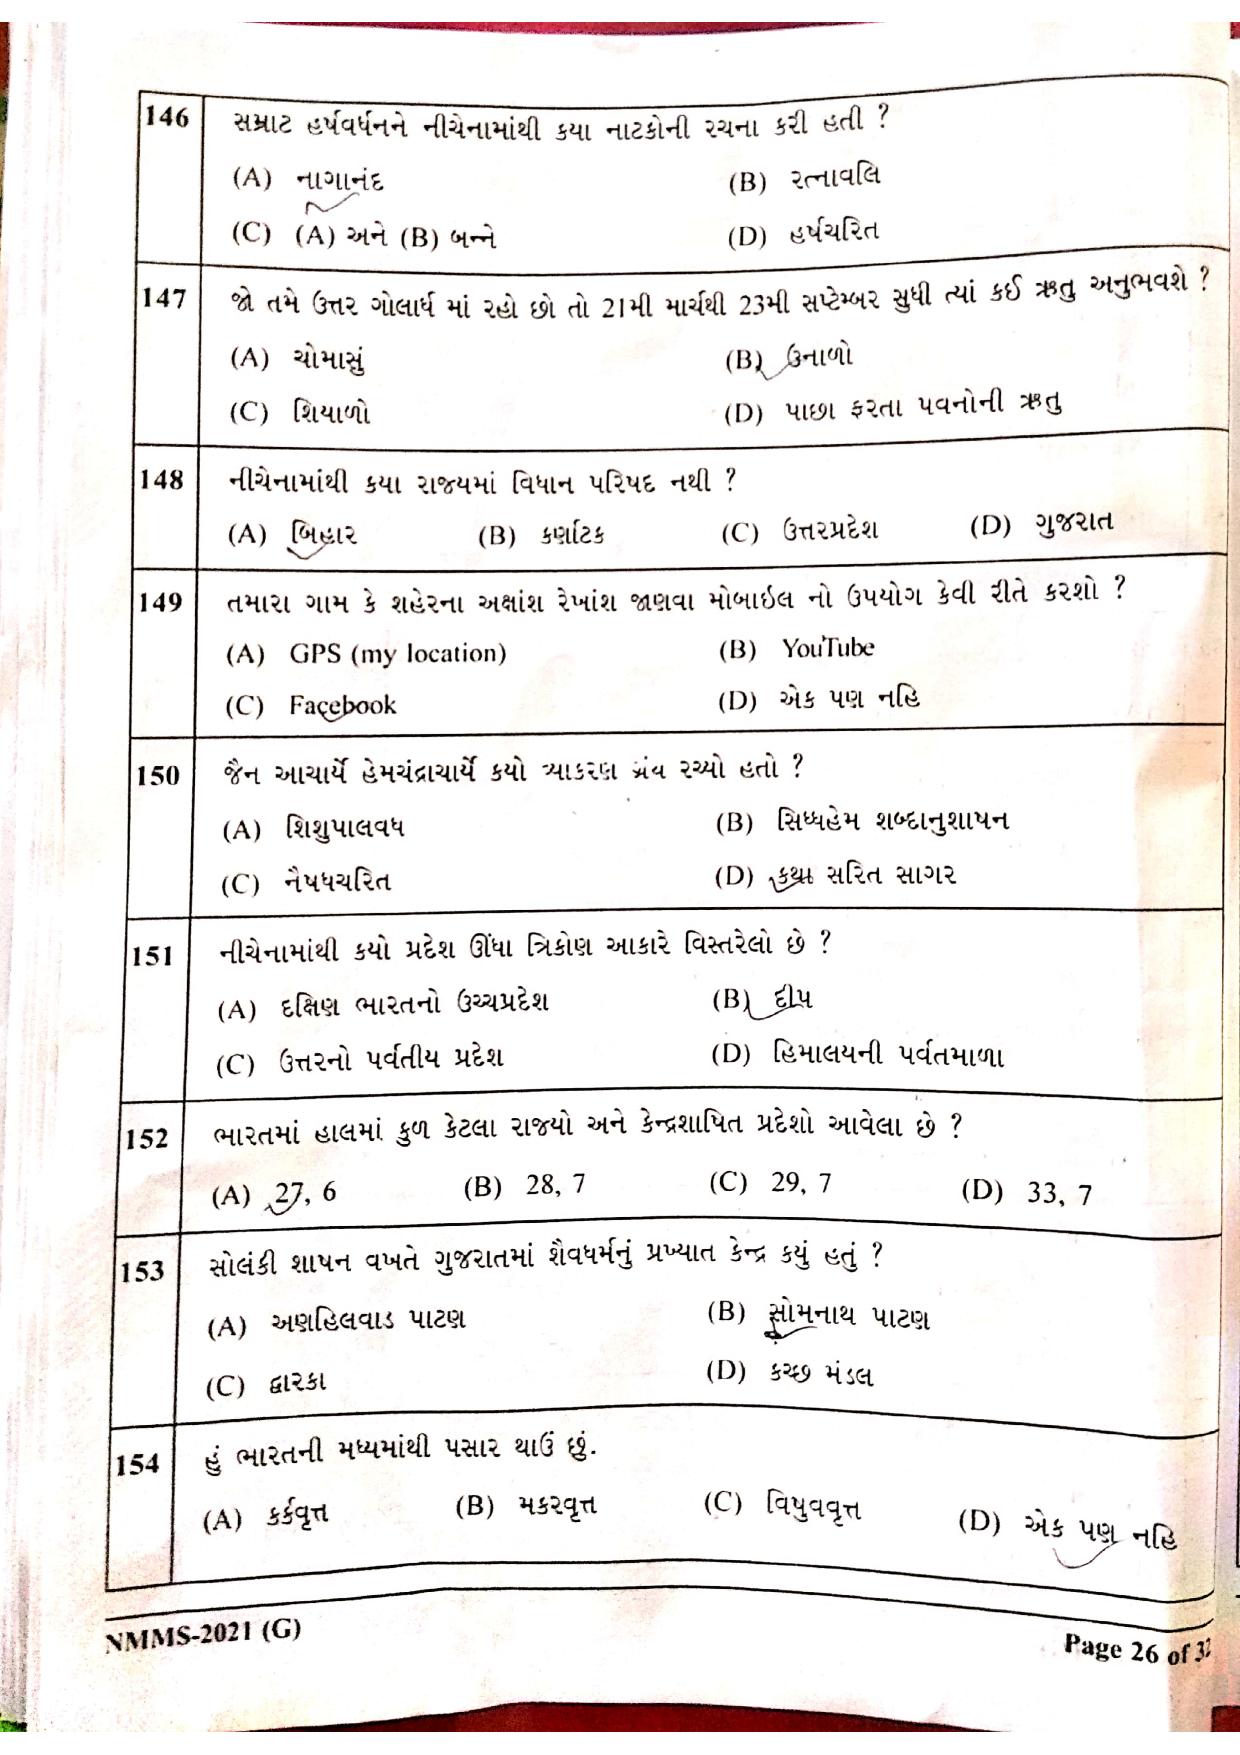 Gujarat NMMS 2021 Question Paper - Page 16